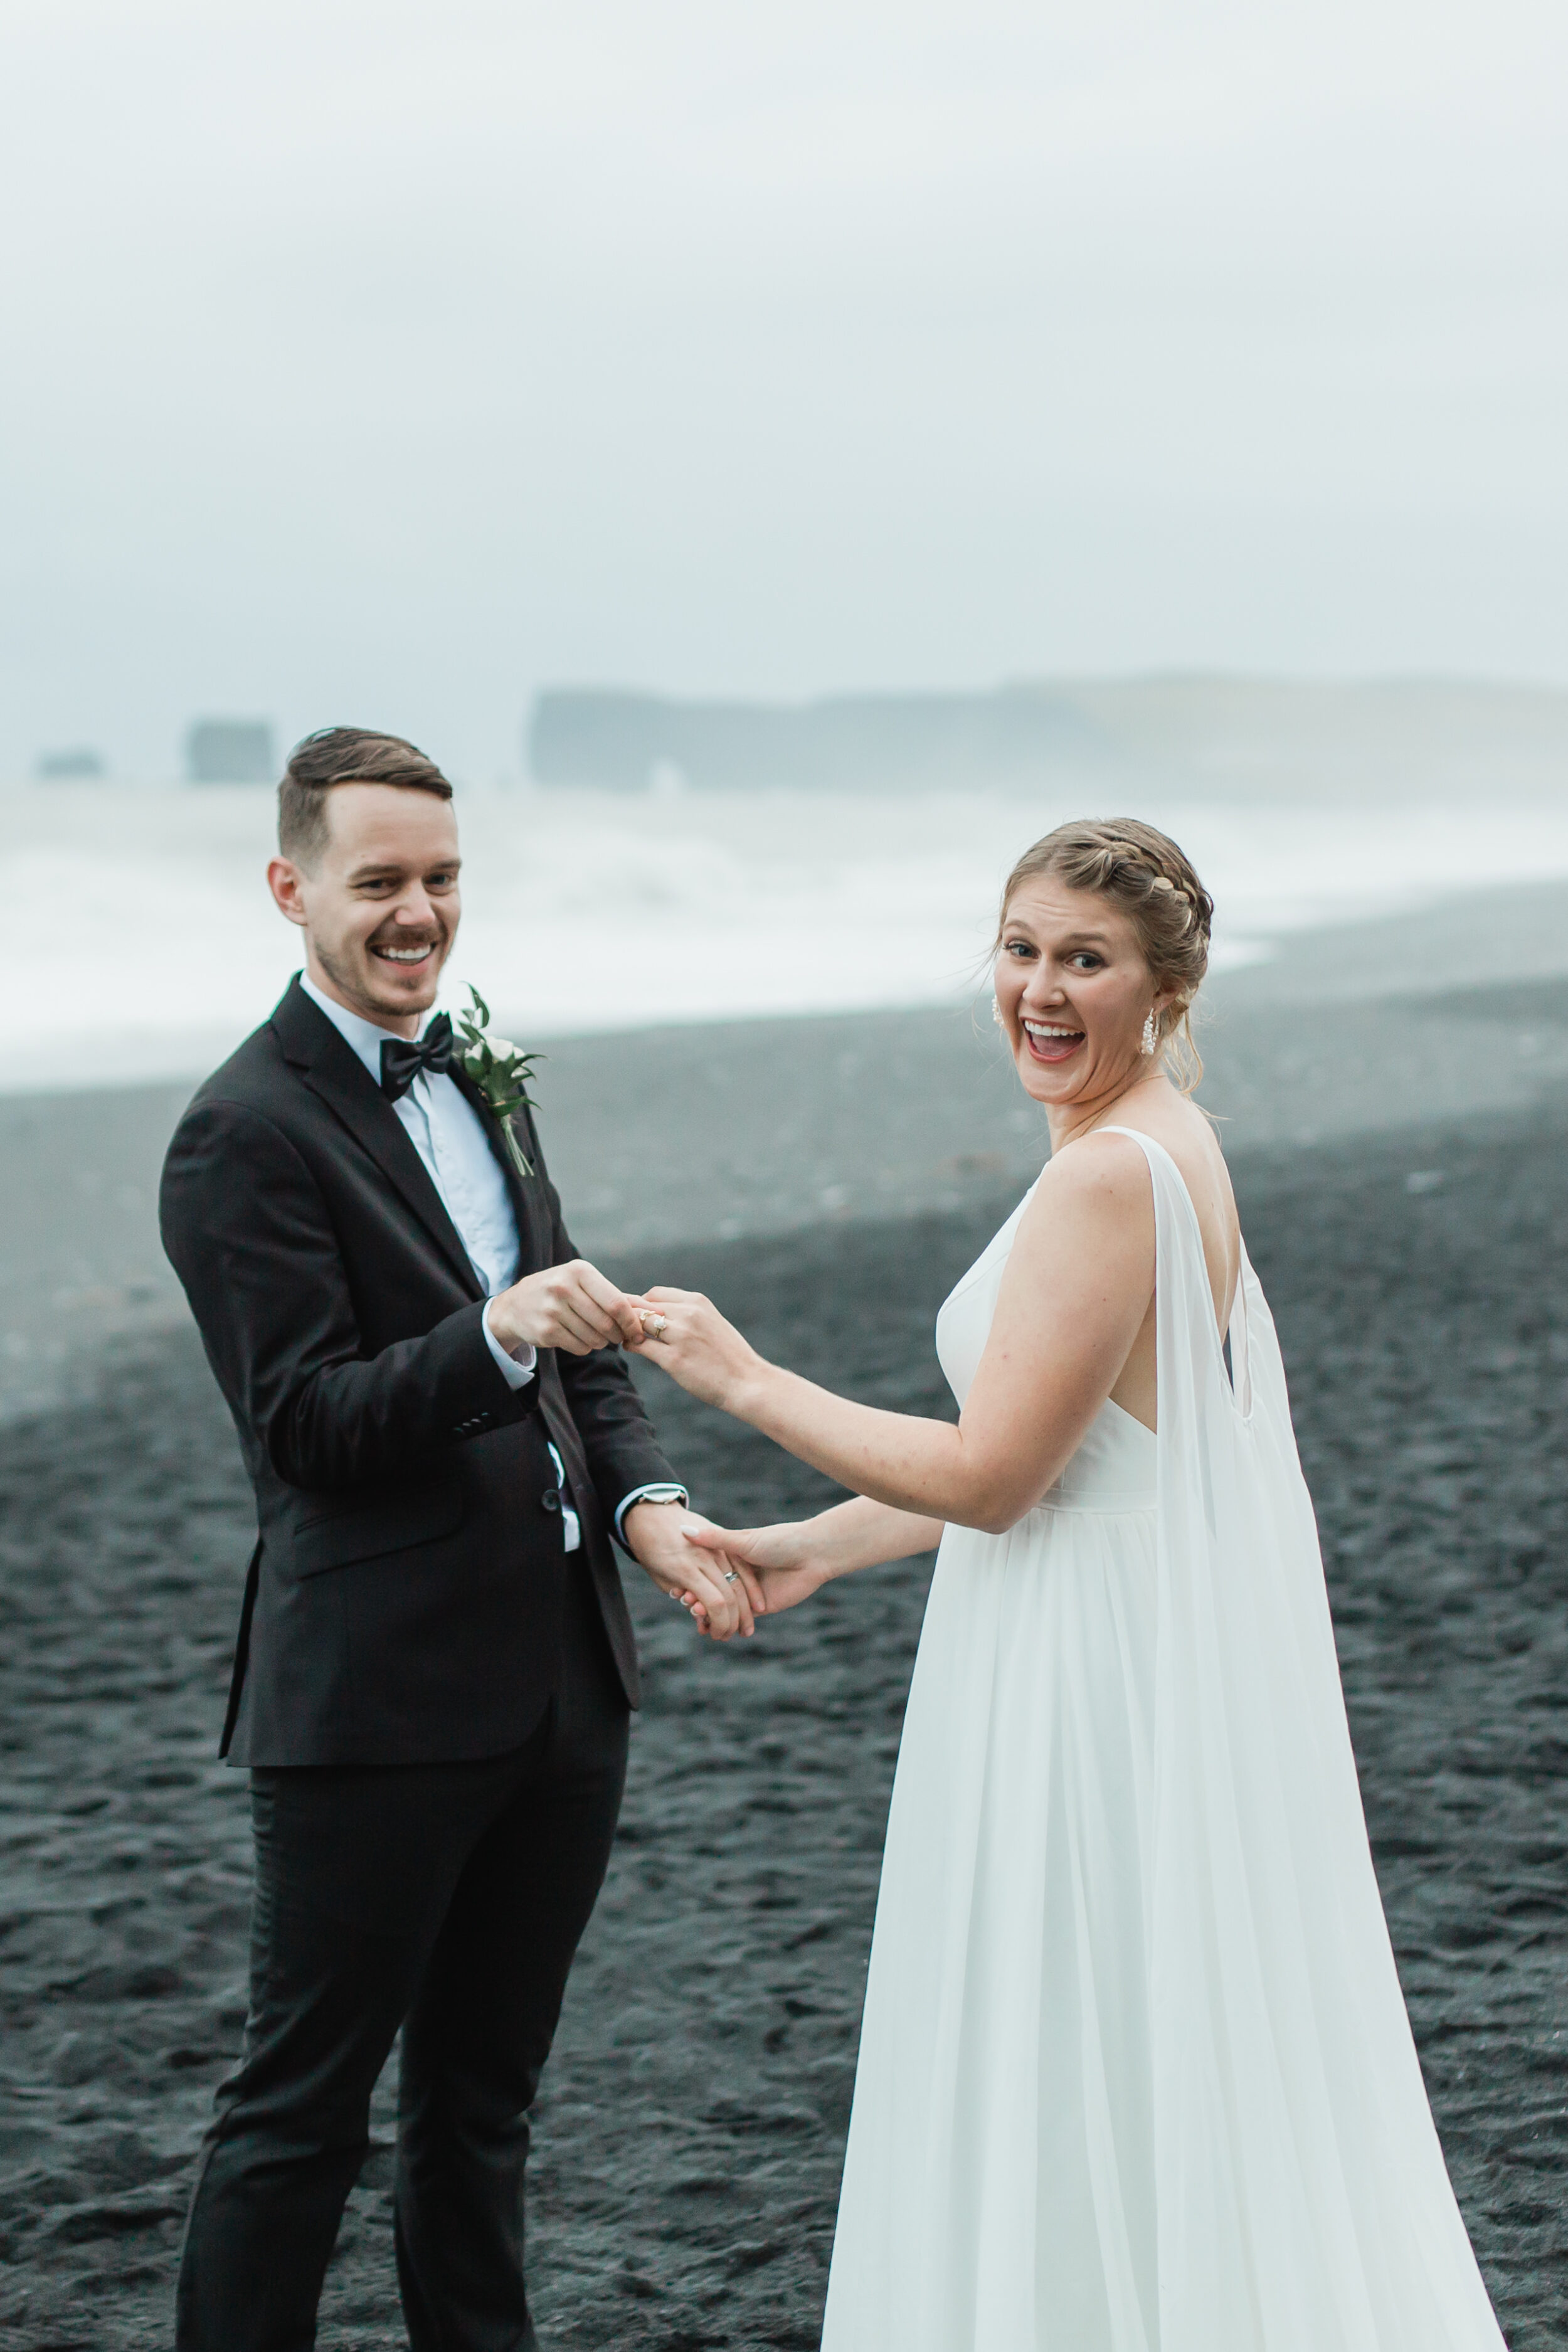 A couple smiles at the camera while holding hands on a black sand beach in Iceland.